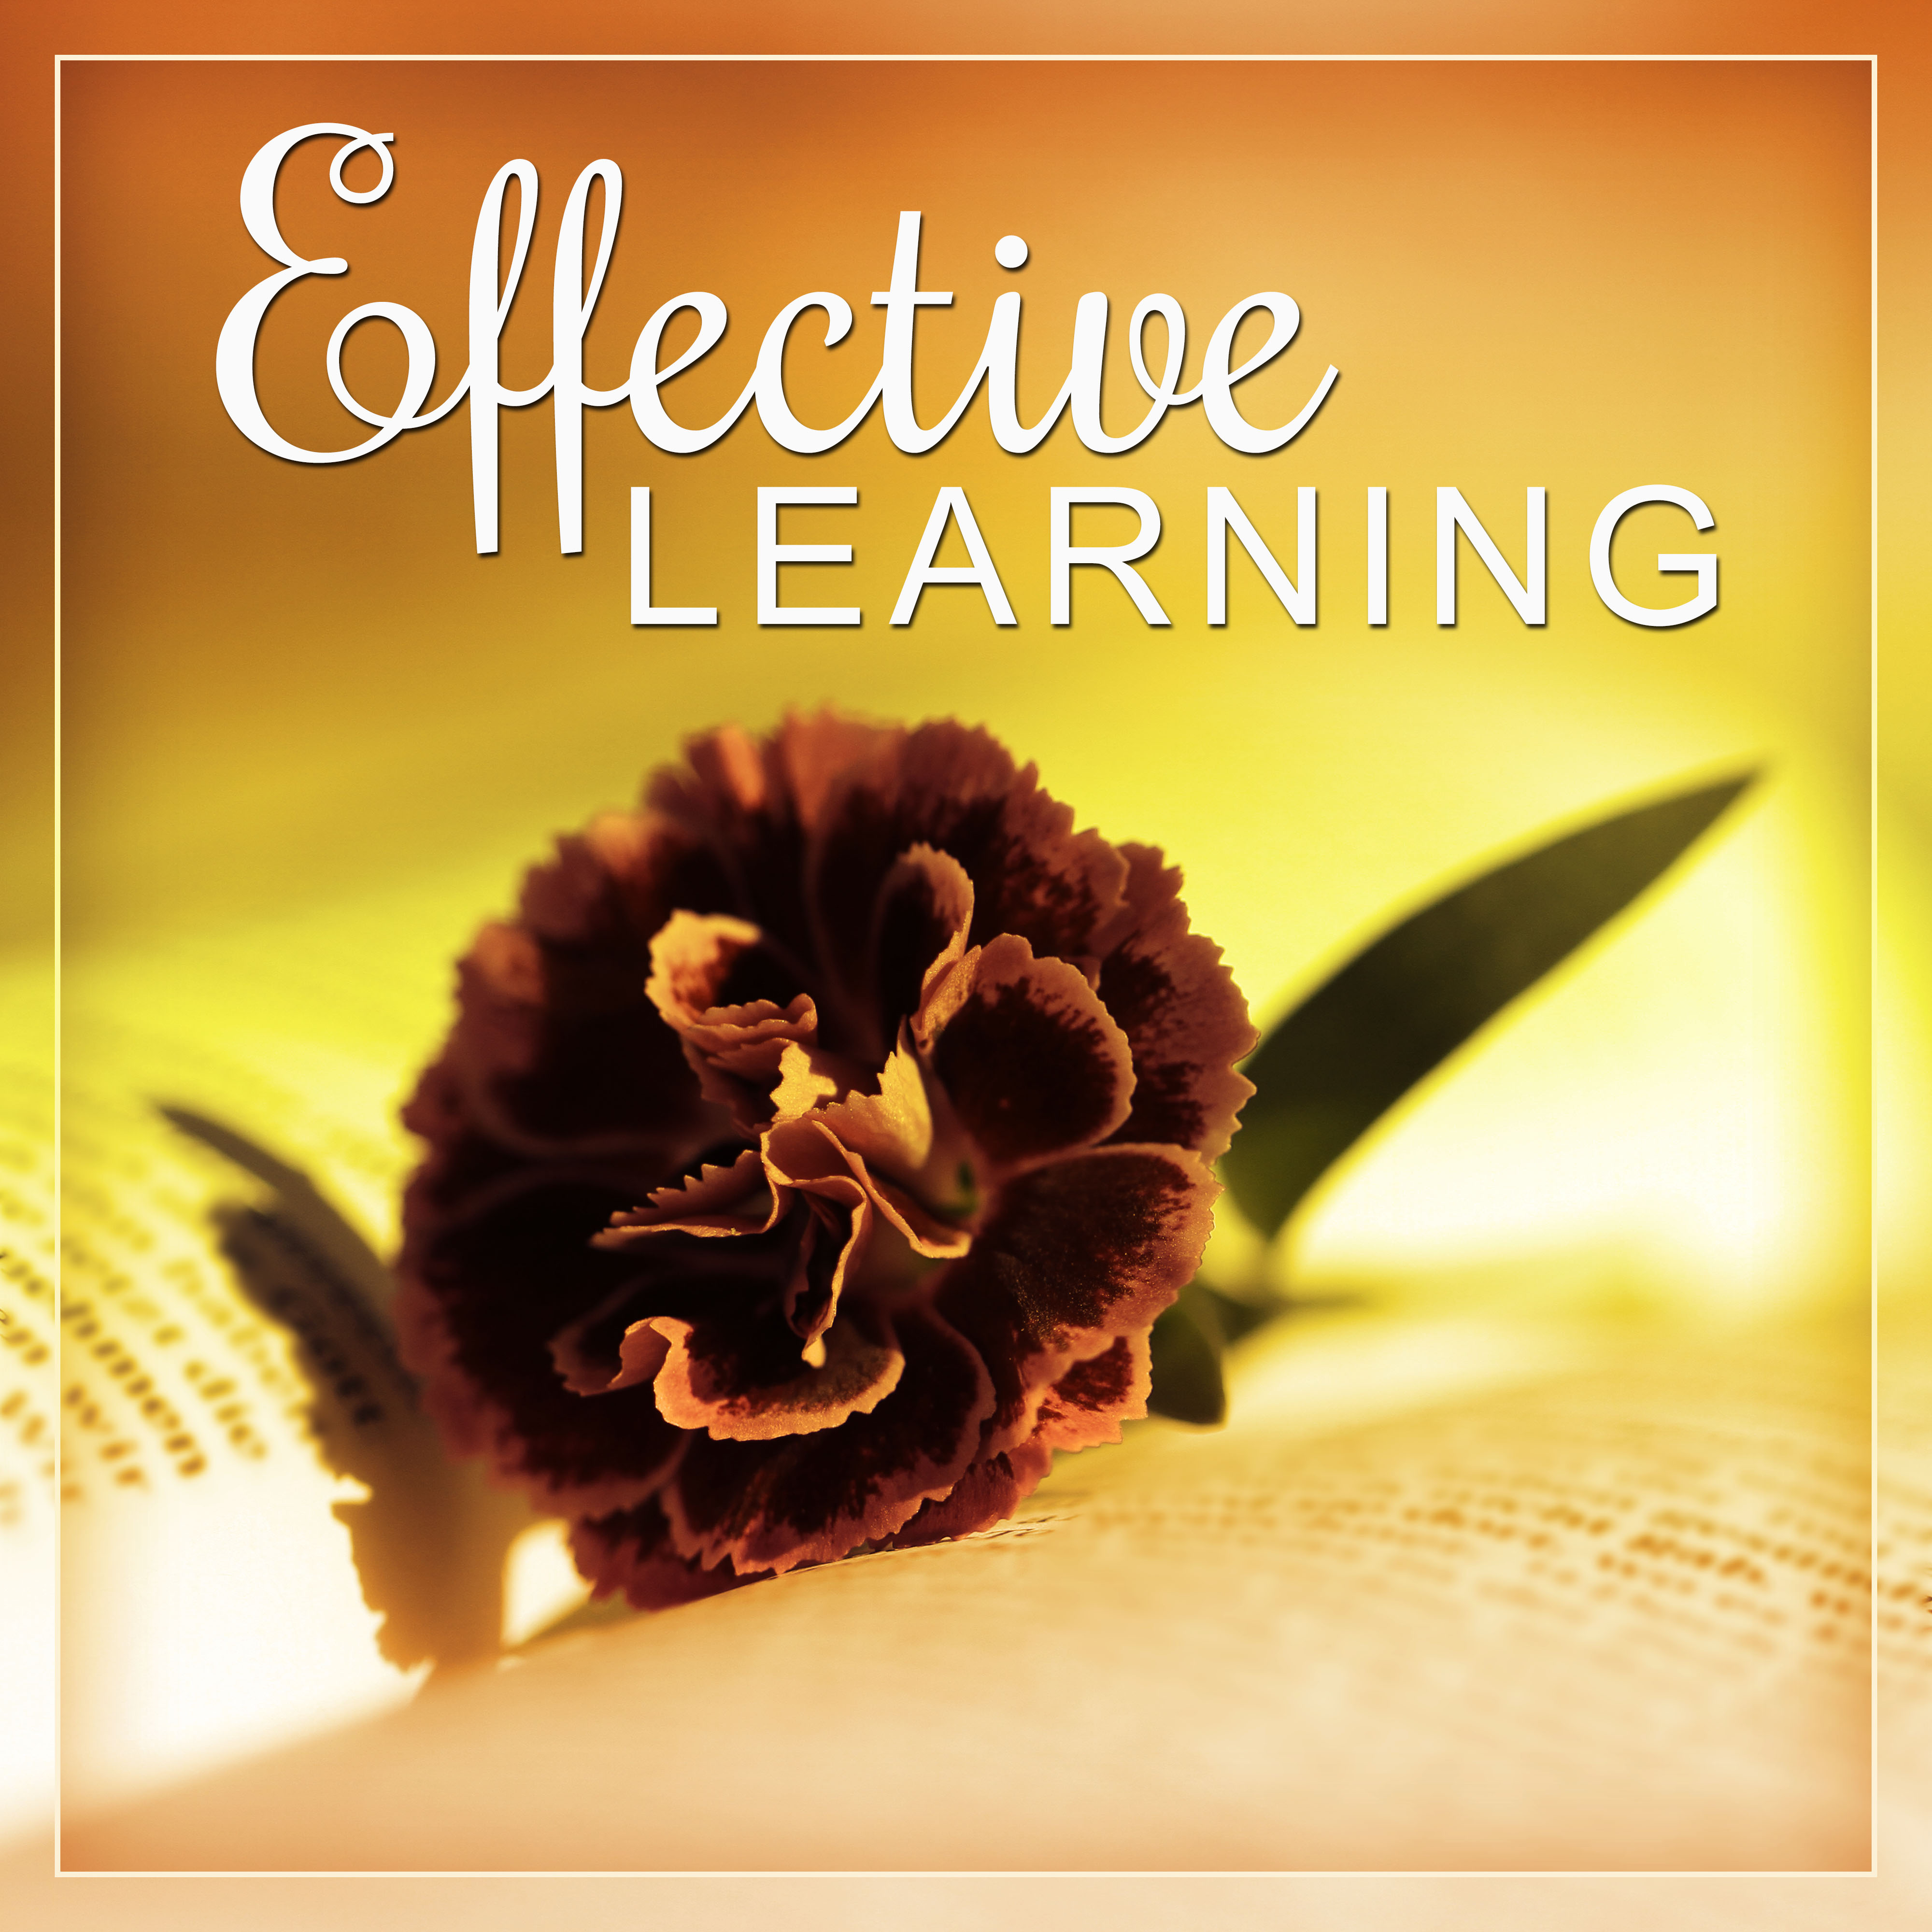 Learning Time – Classical Sounds for Study, Music Helps Pass the Exam, Focused Mind, Famous, Classical Composers to Study